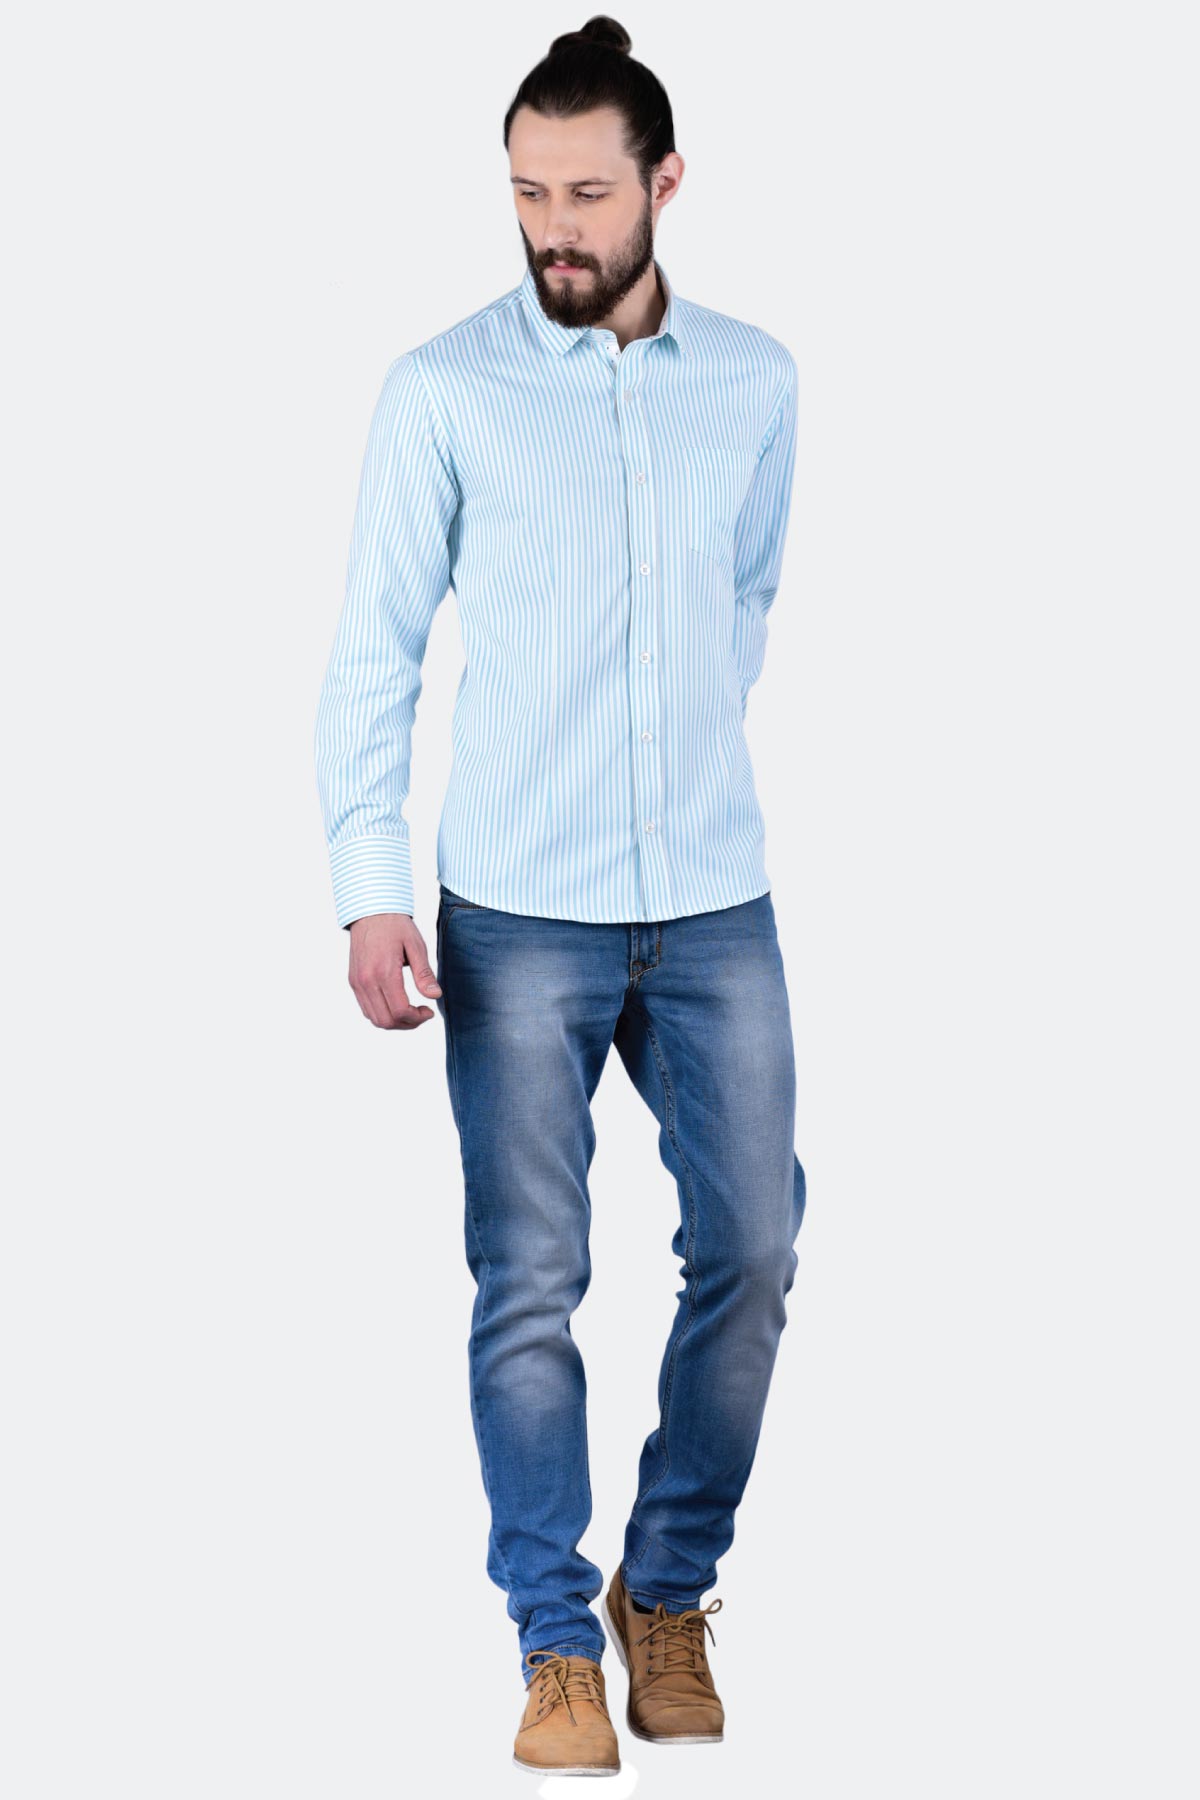 Double Shade Shirt - Quontico